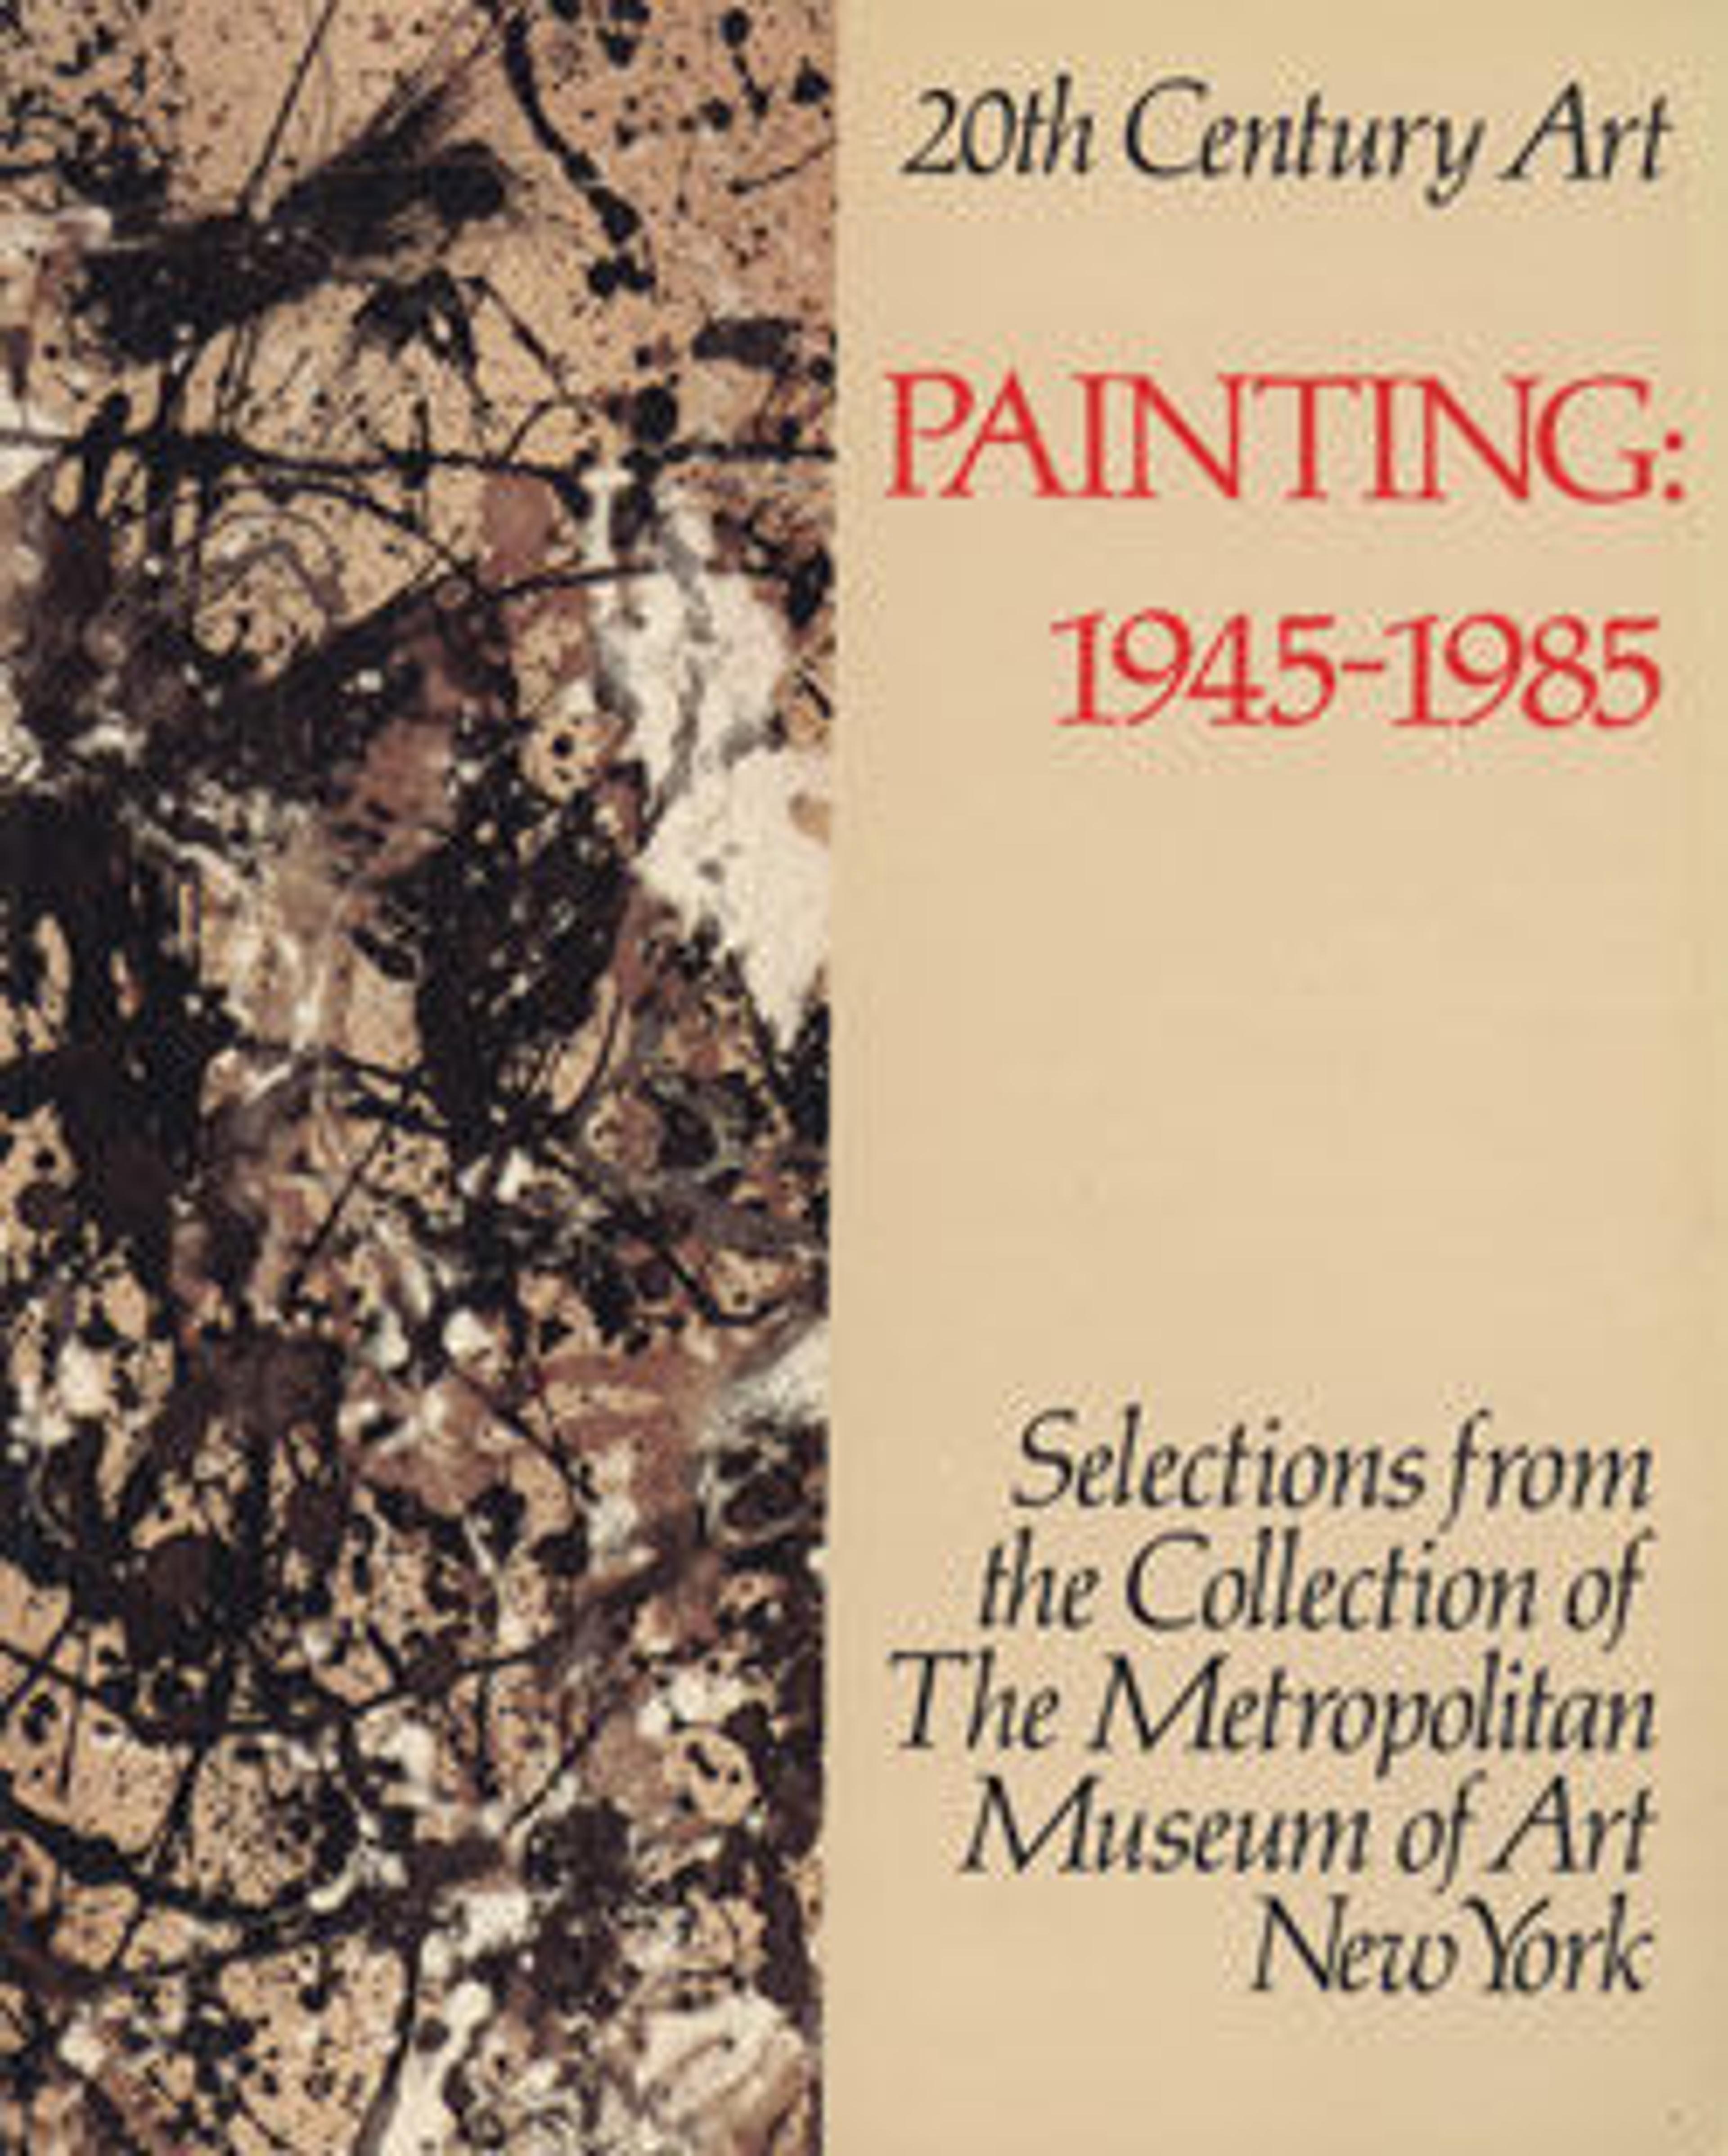 Twentieth-Century Art: Selections from the Collection of The Metropolitan Museum of Art. Vol. 2, Painting, 1945-1985